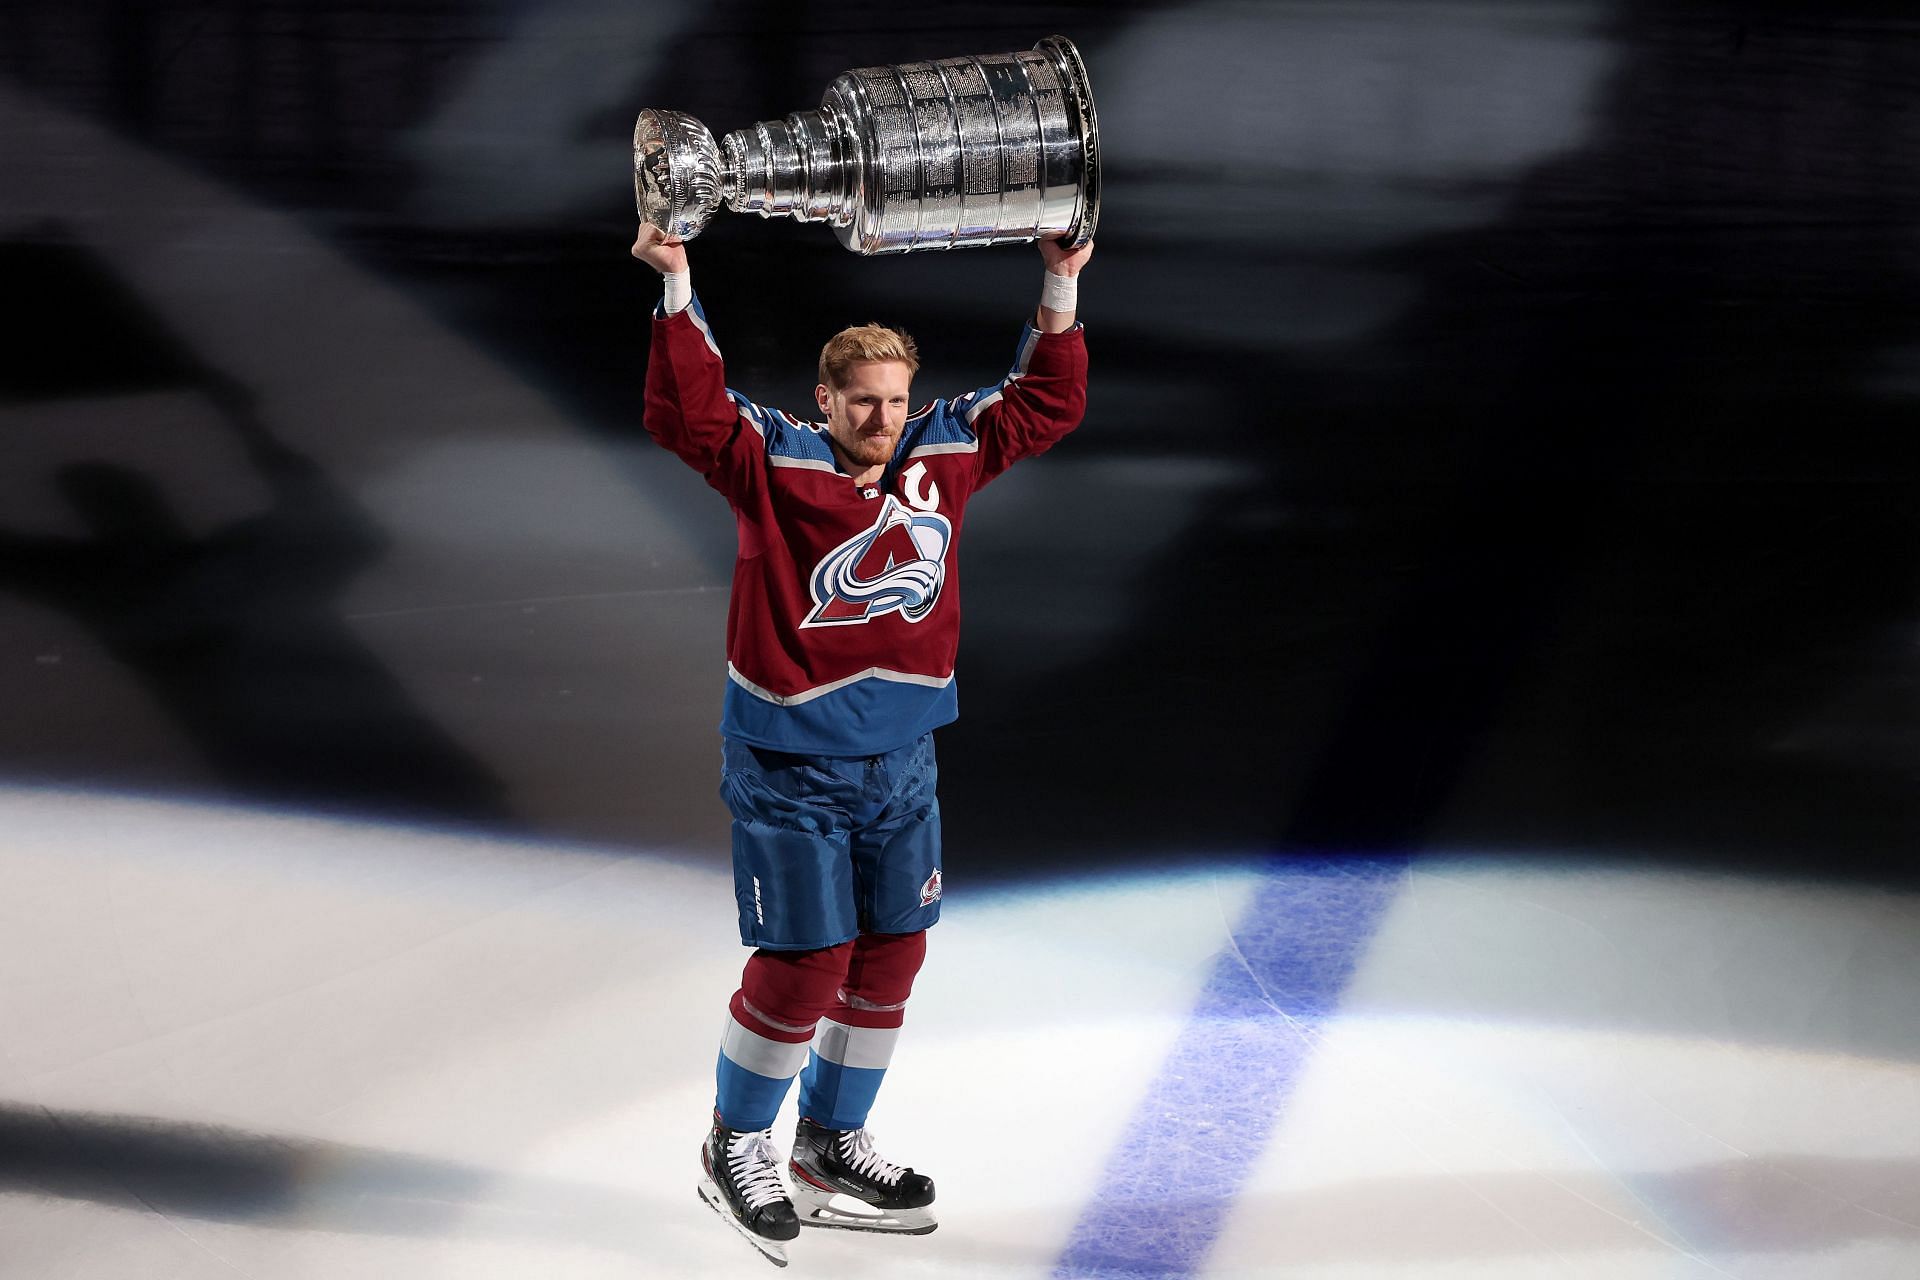 Gabriel Landeskog out another season. How will Avalanche adjust?